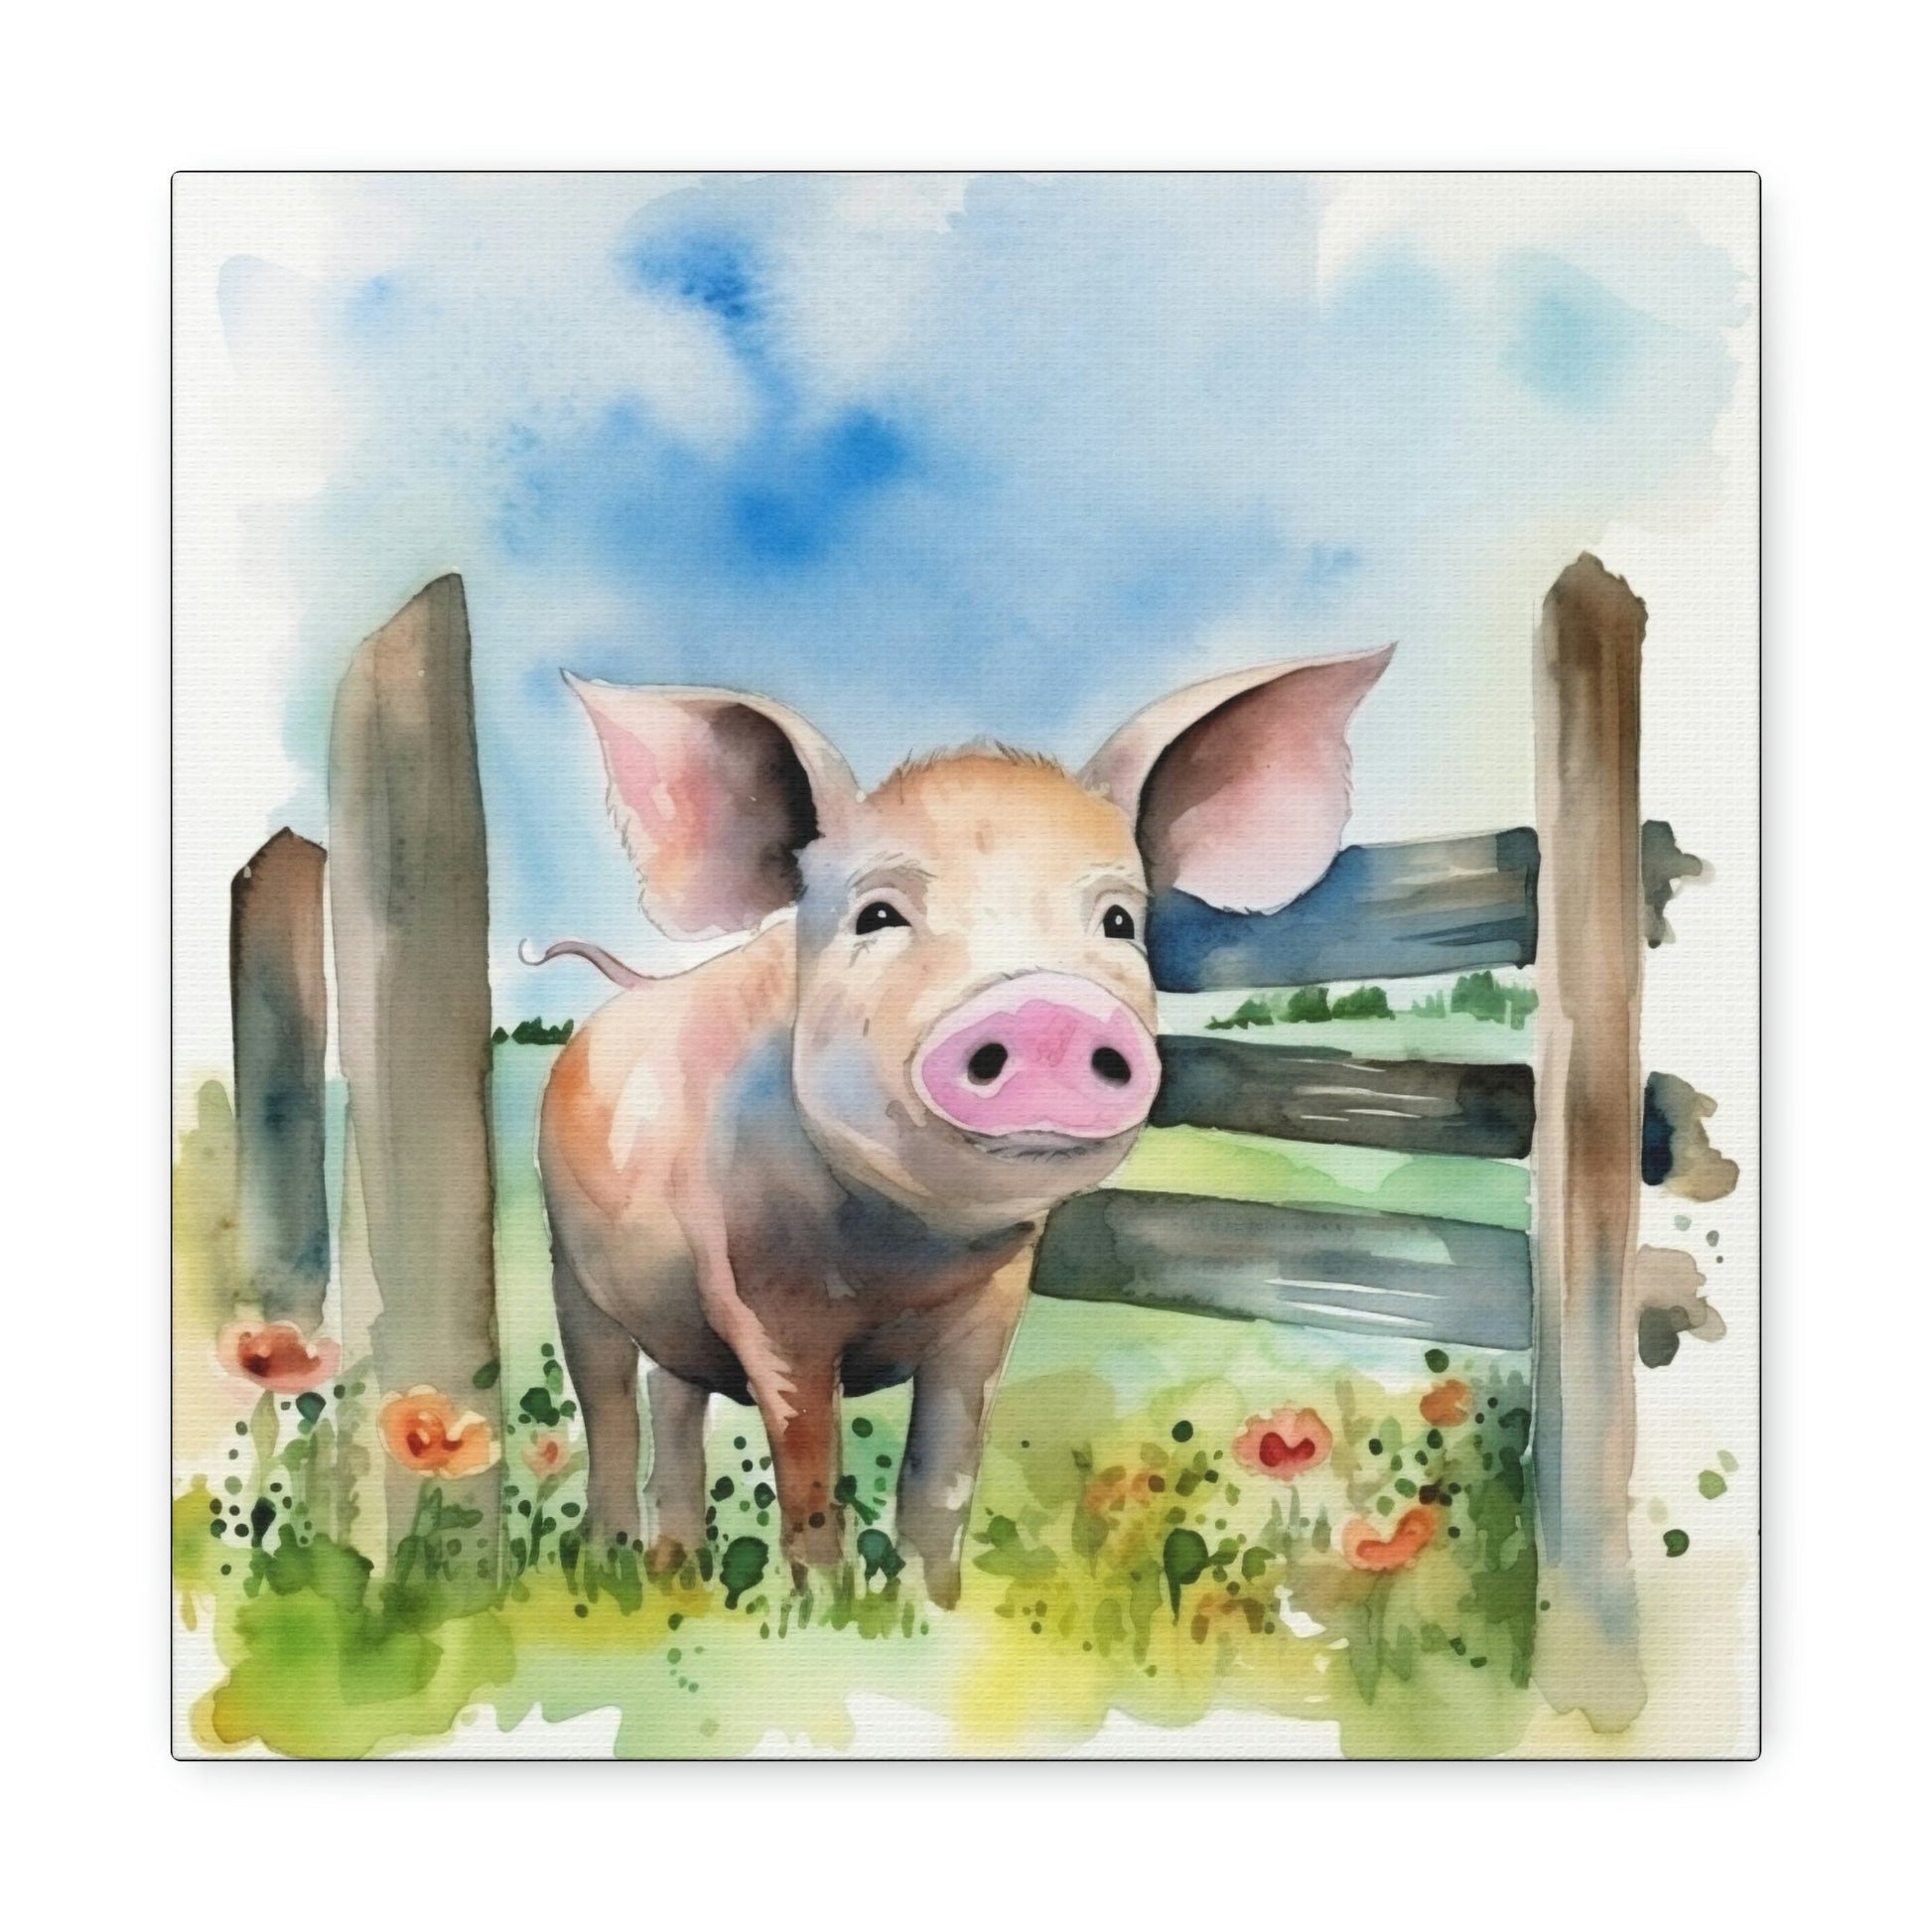 Rustic Folk Art Watercolor Pig Canvas Gallery Wraps - Perfect Gift for Your Country Farm Friends